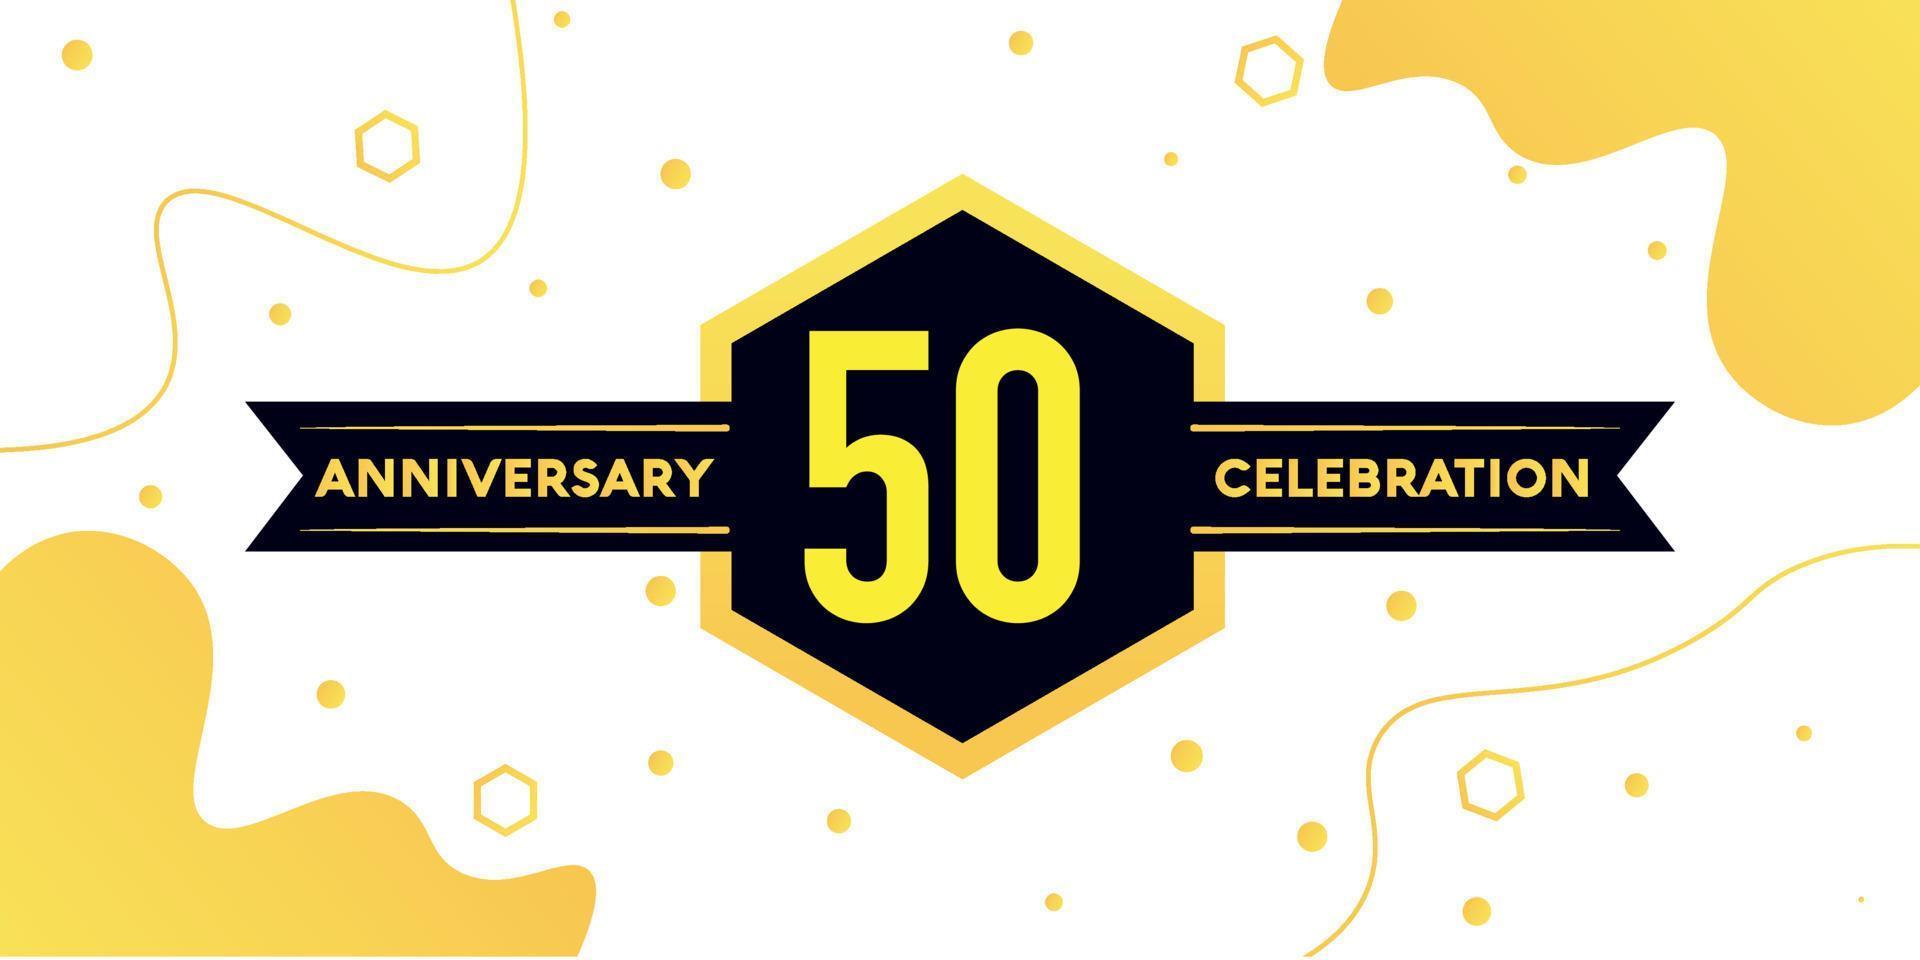 50 years anniversary logo vector design with yellow geometric shape with black and abstract design on white background template